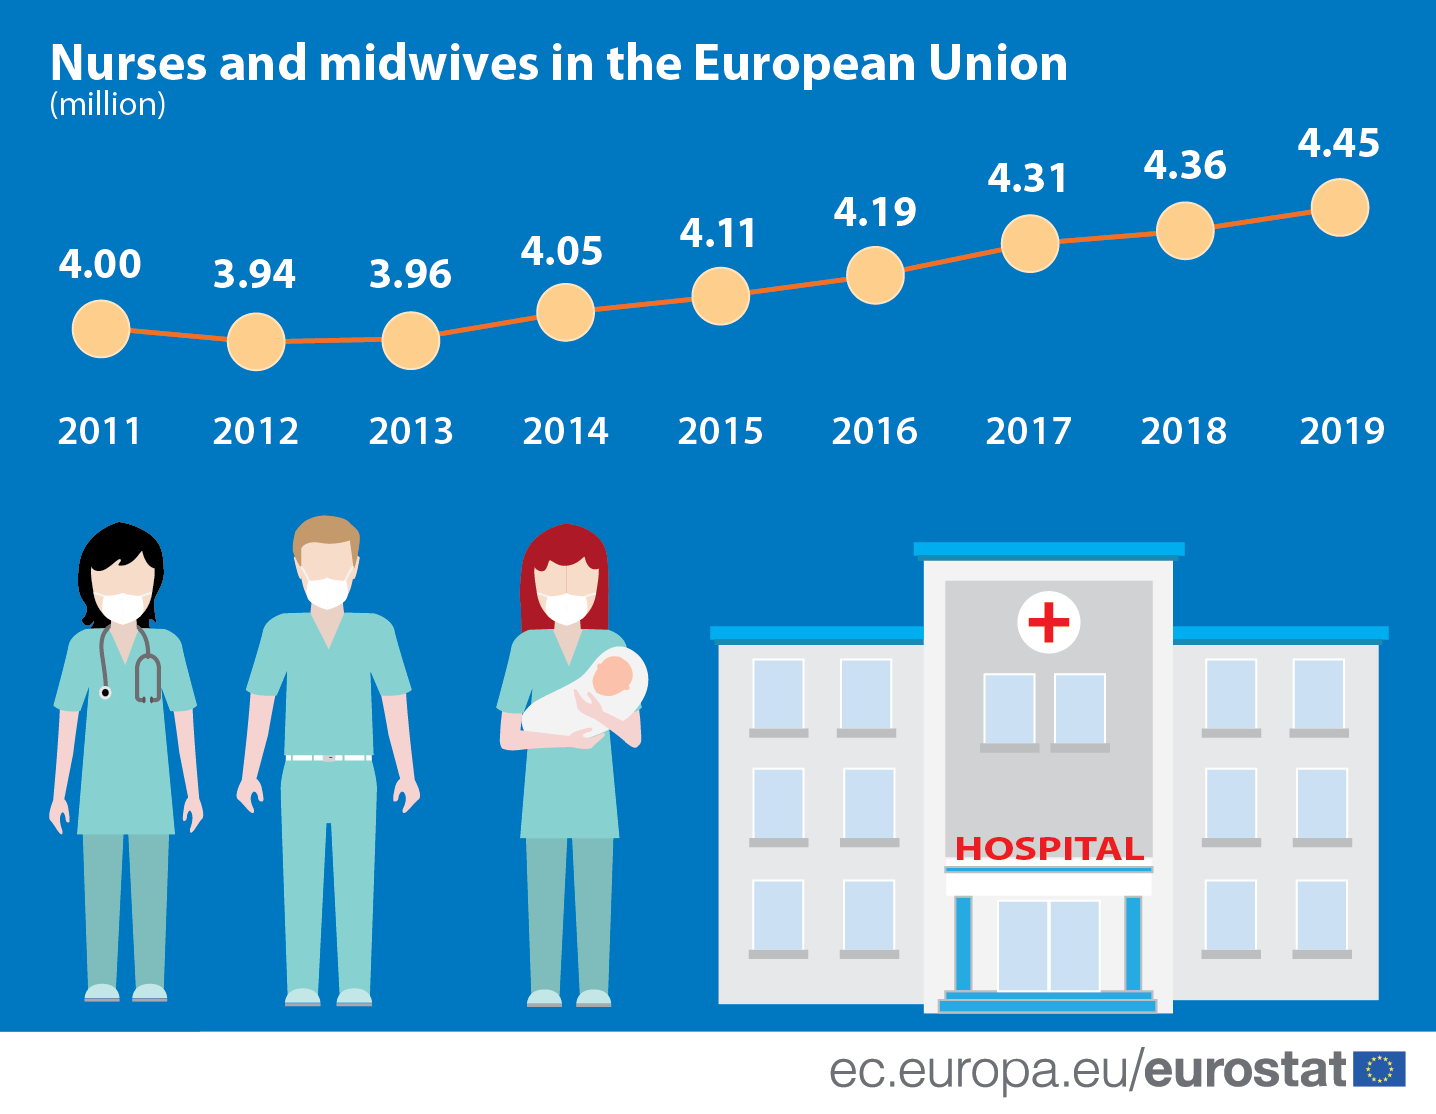 Infographic: Nurses and midwives in the European Union, 2011-2019 (million) 